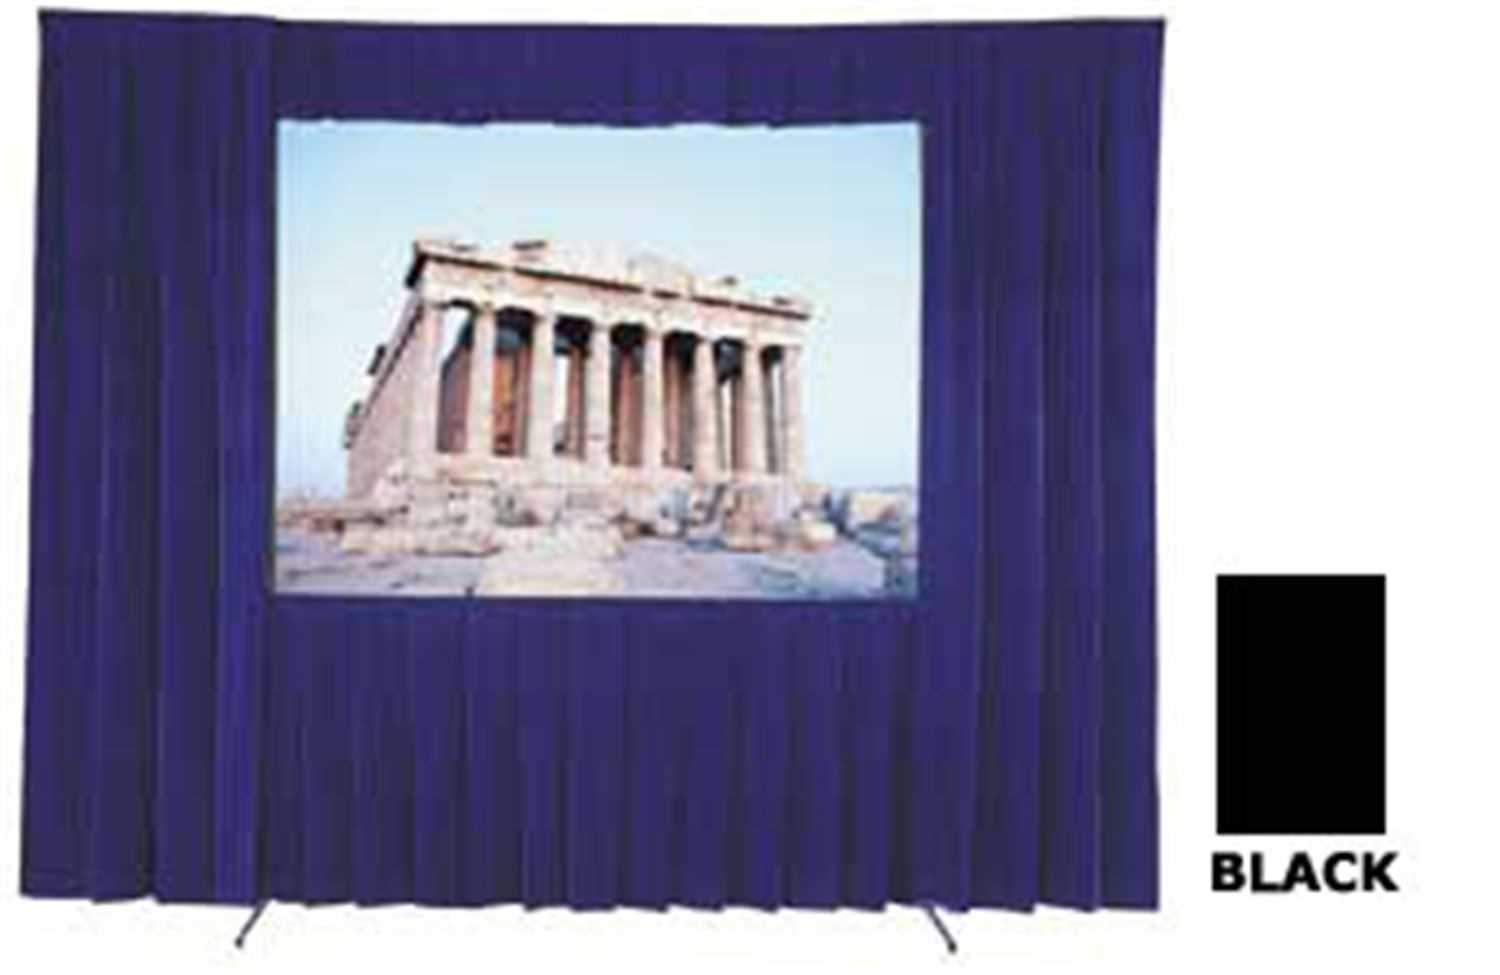 Dalite Black Skirt For 10 1/2 X 14 Ft Screen - ProSound and Stage Lighting